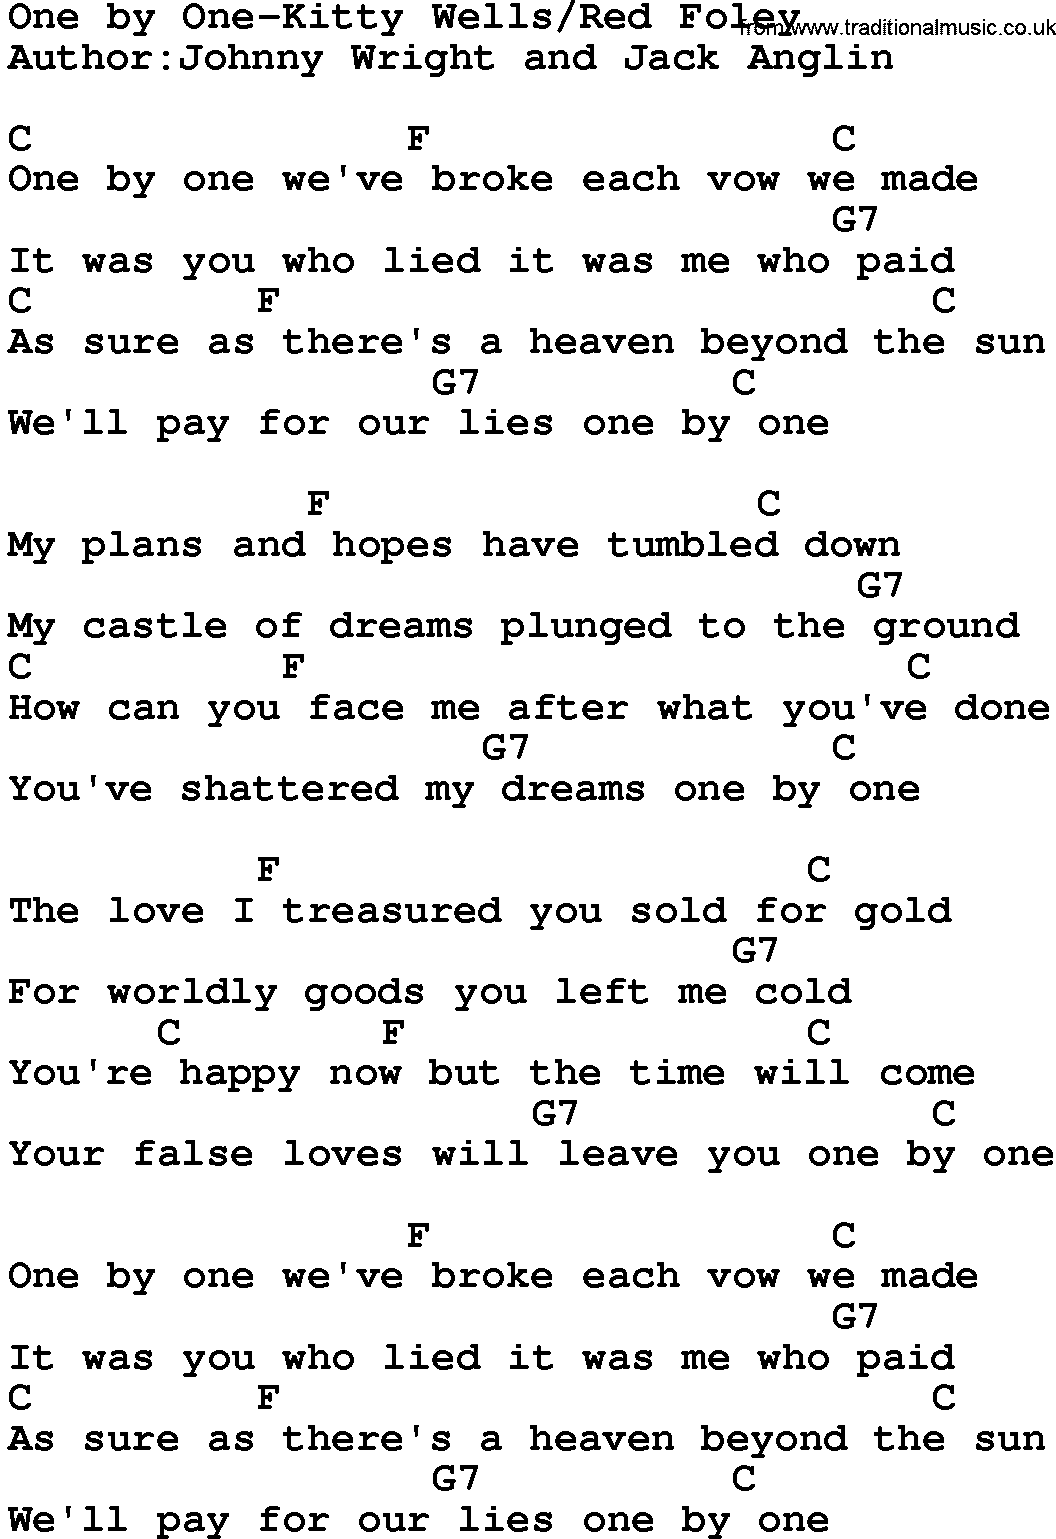 Country music song: One By One-Kitty Wells&red Foley lyrics and chords